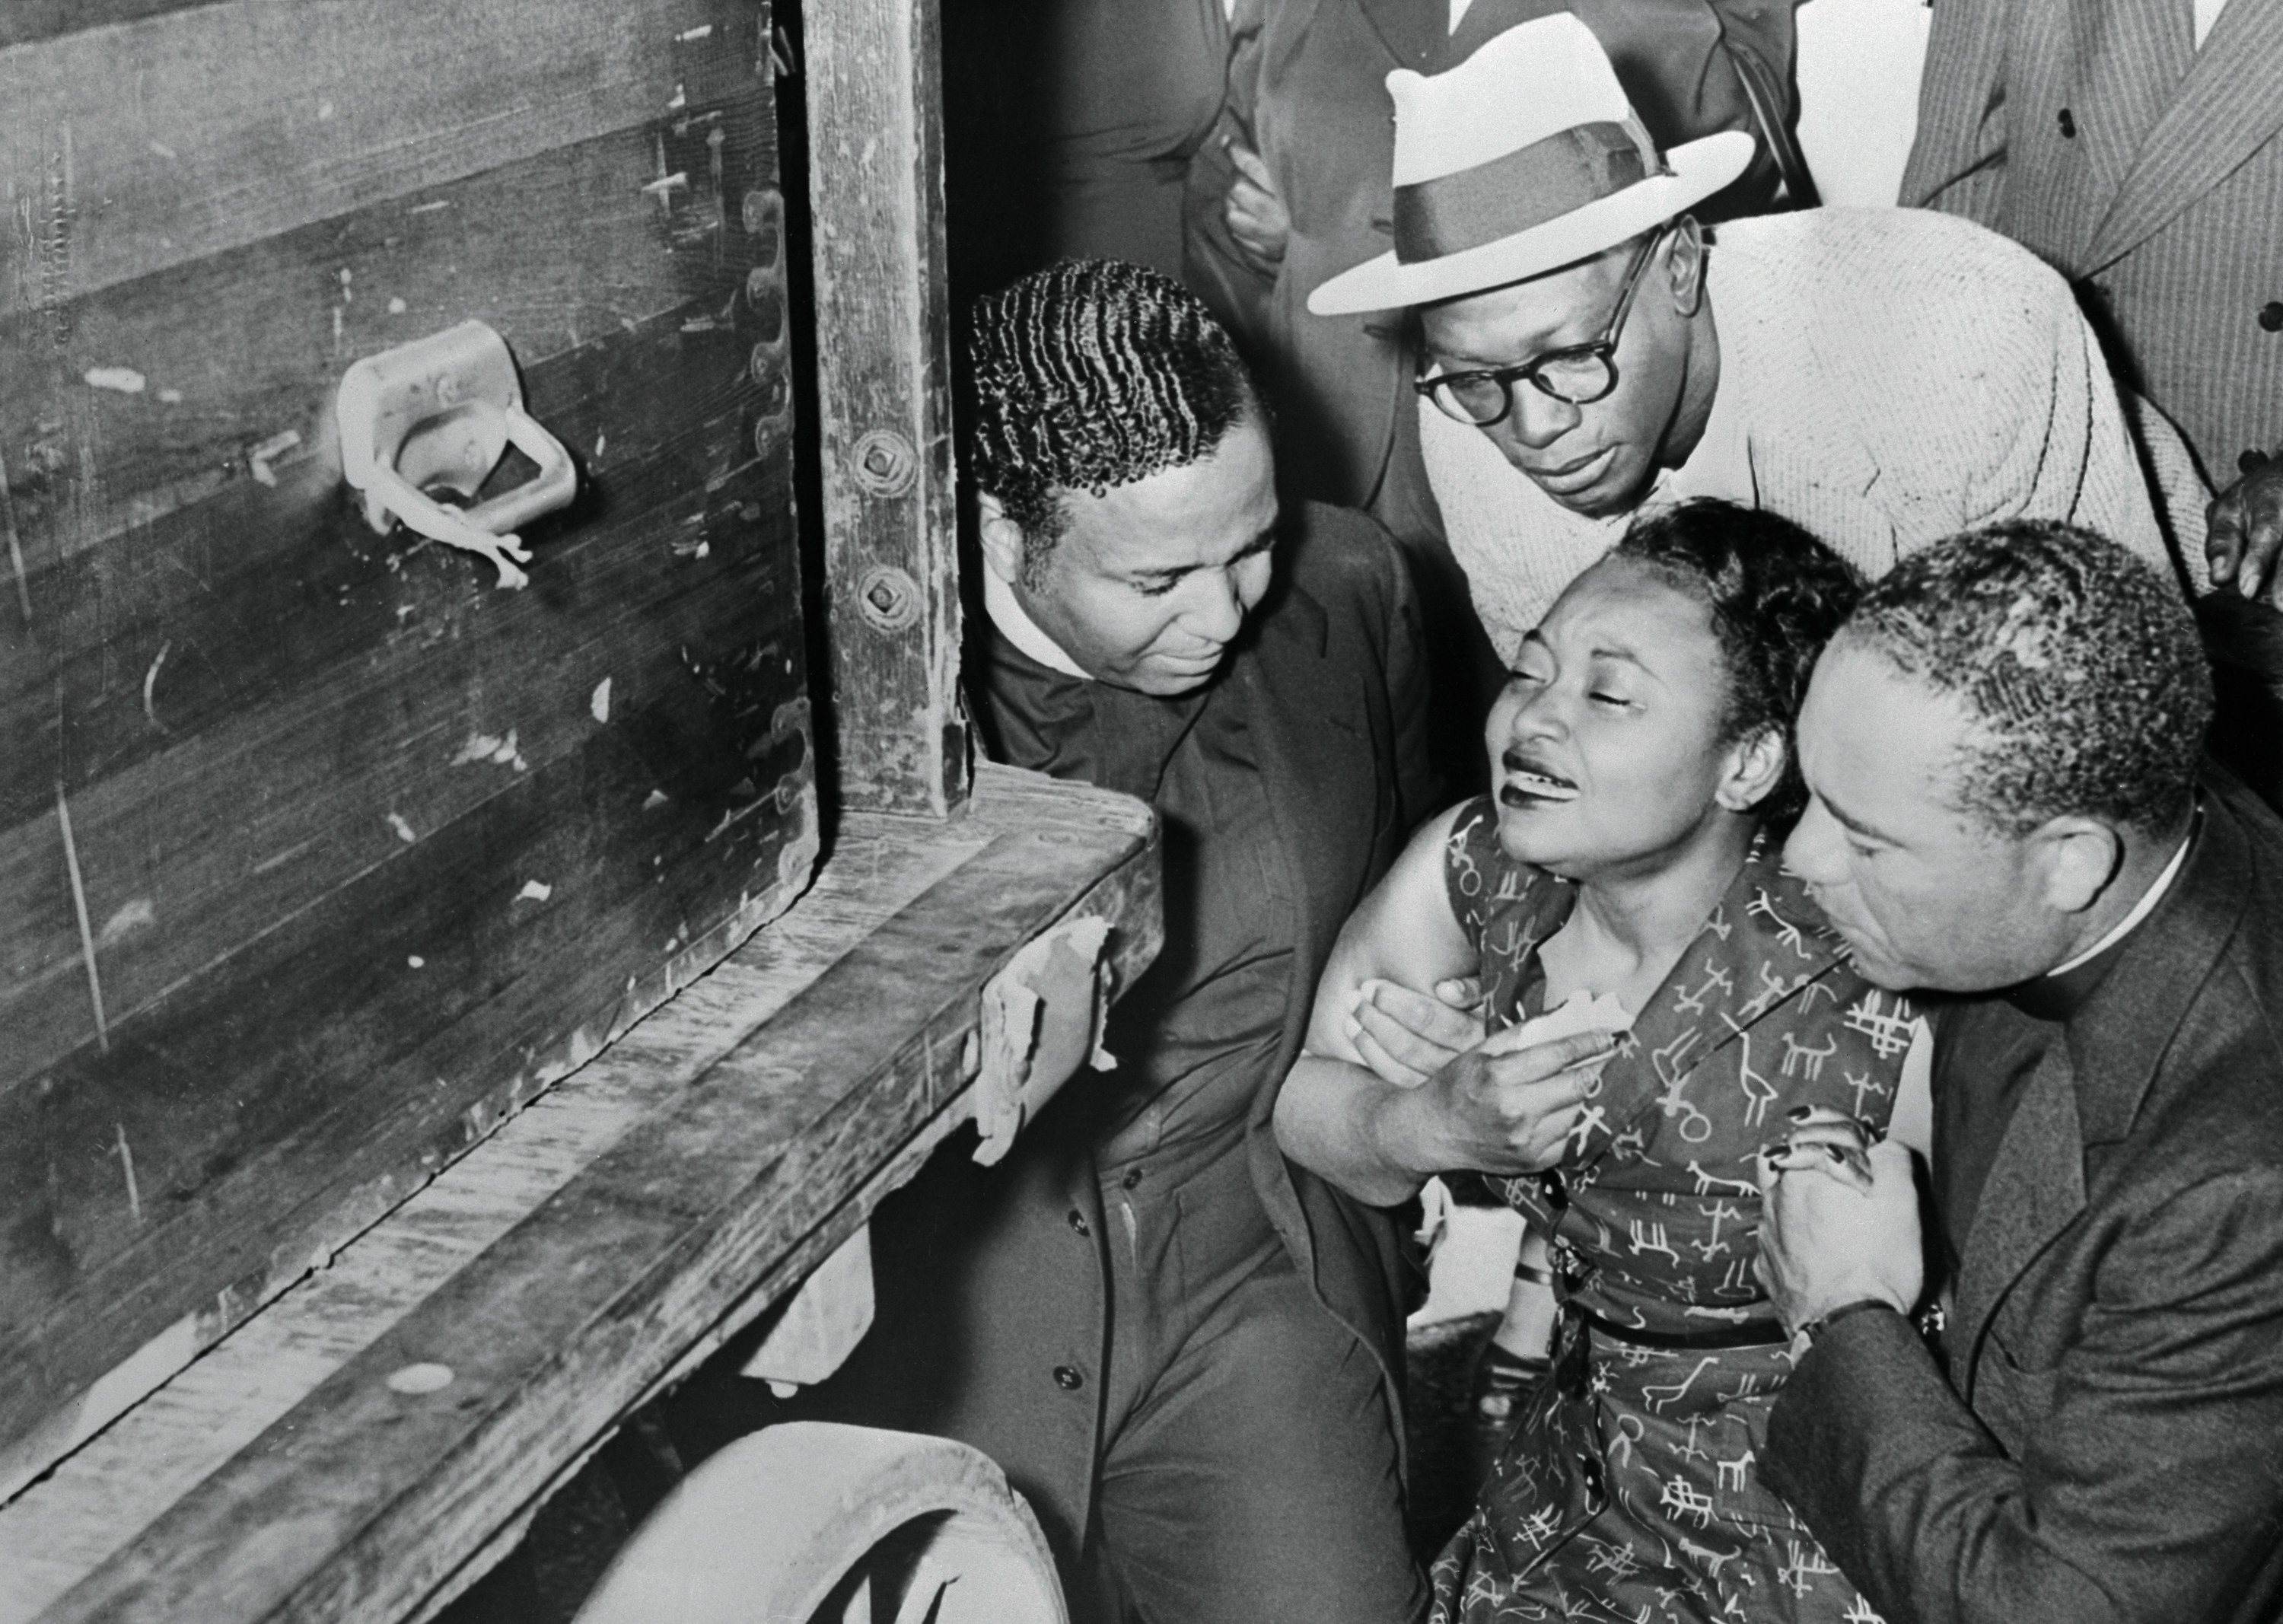 mamie till-mobley crying